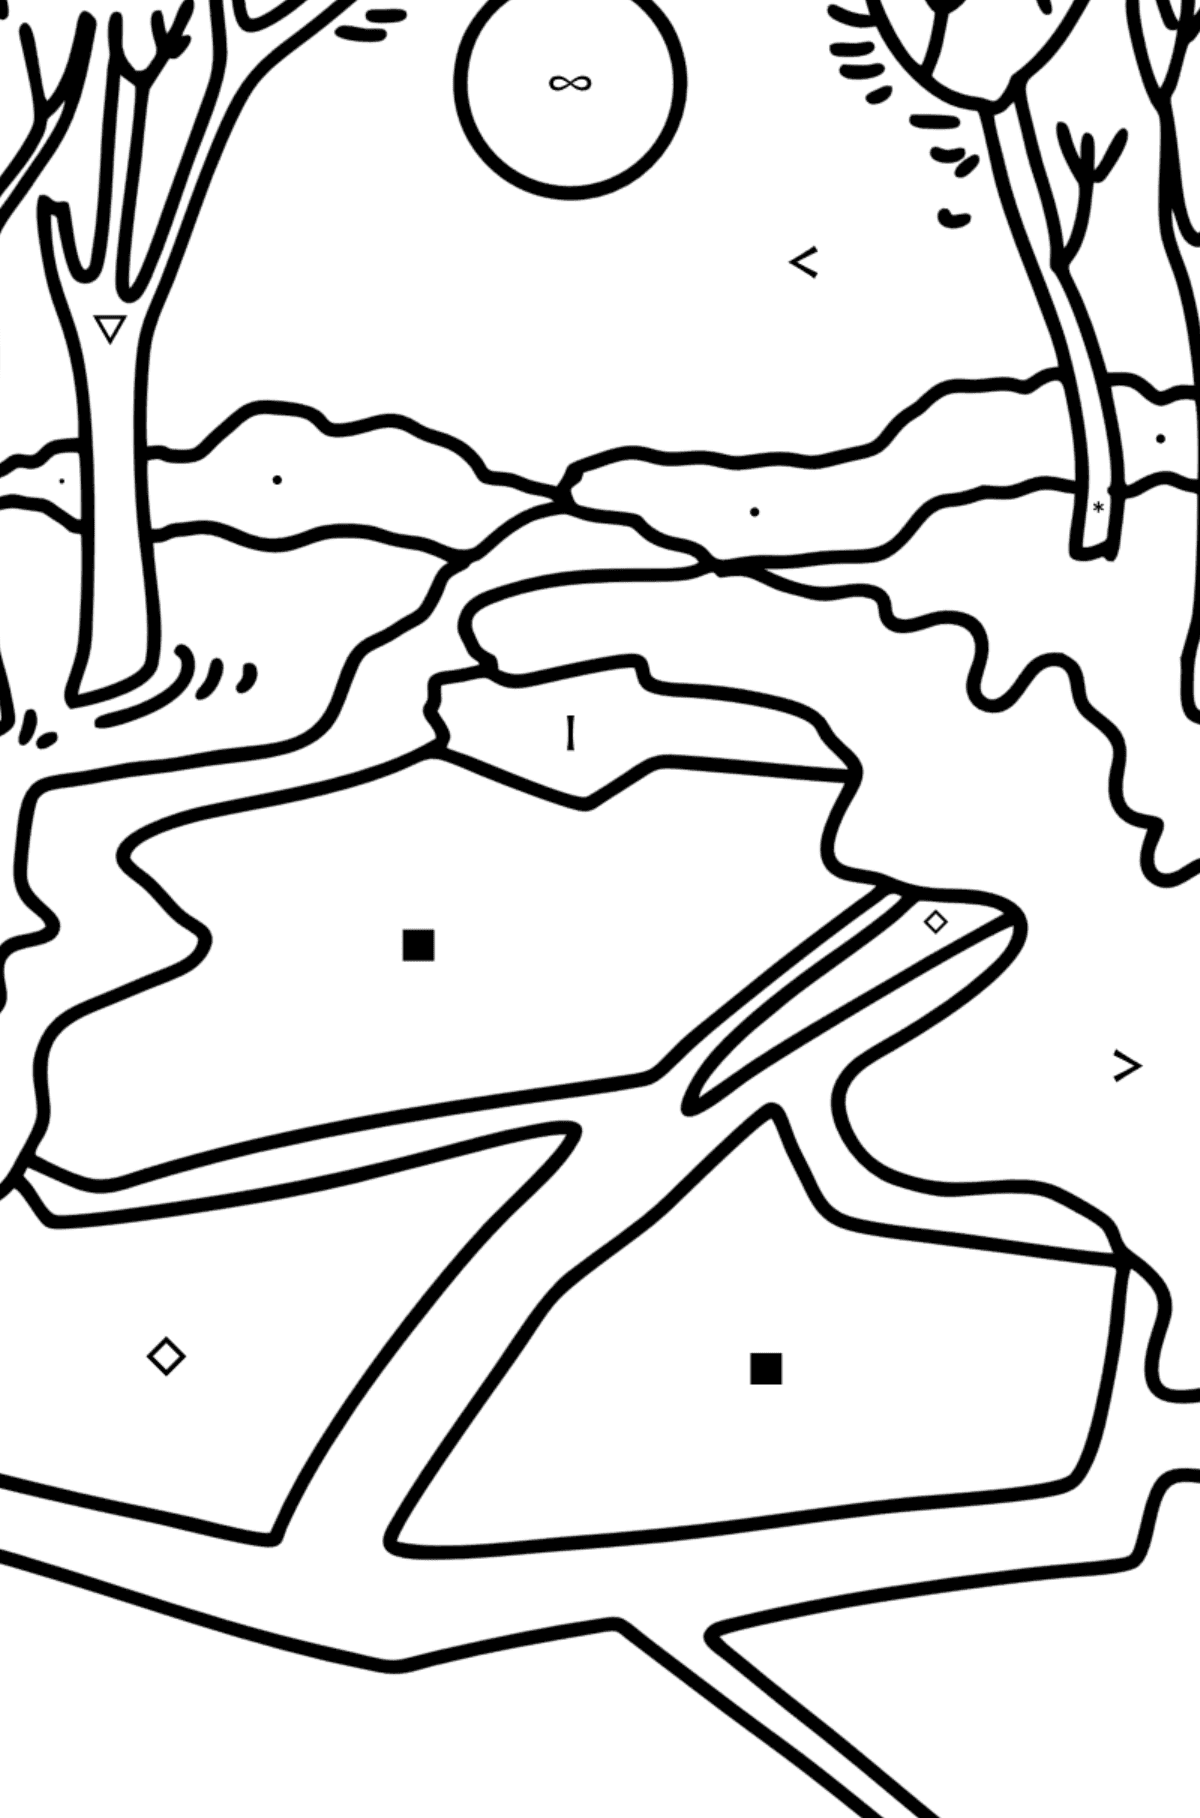 Spring River coloring page - Coloring by Symbols for Kids